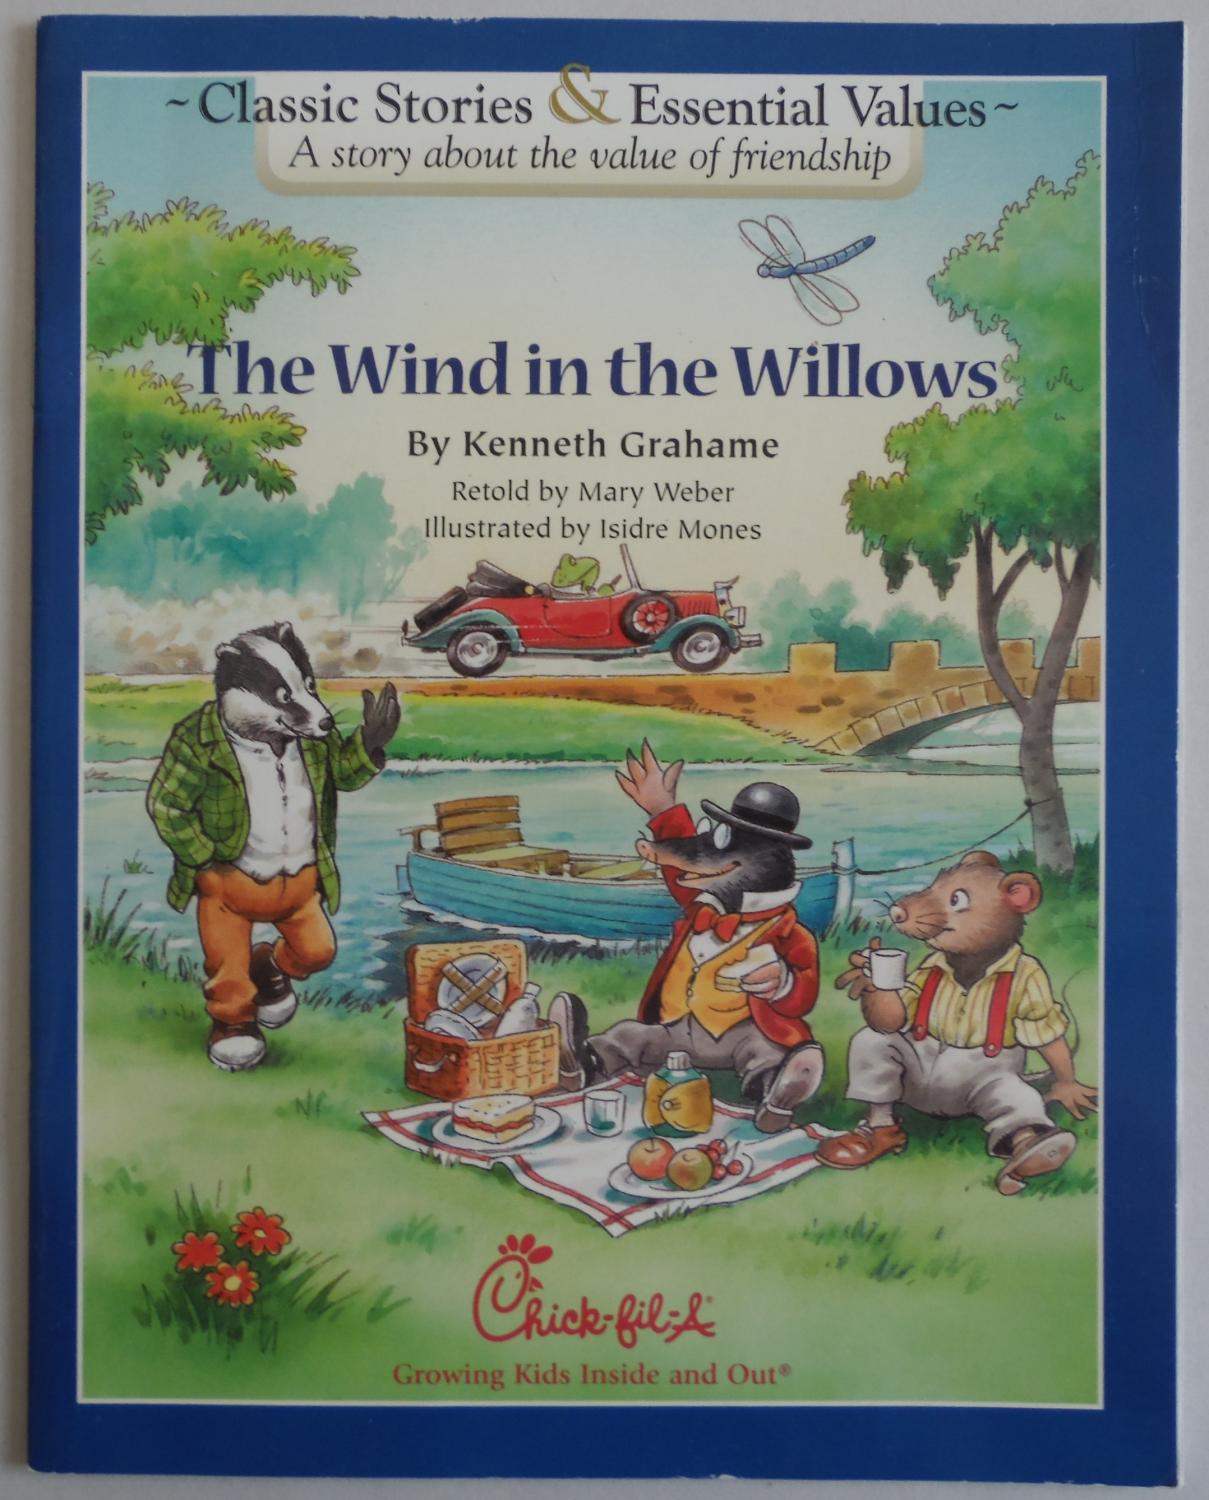 CHICK-FIL-A CLASSIC STORIES & ESSENTIAL VALUES 